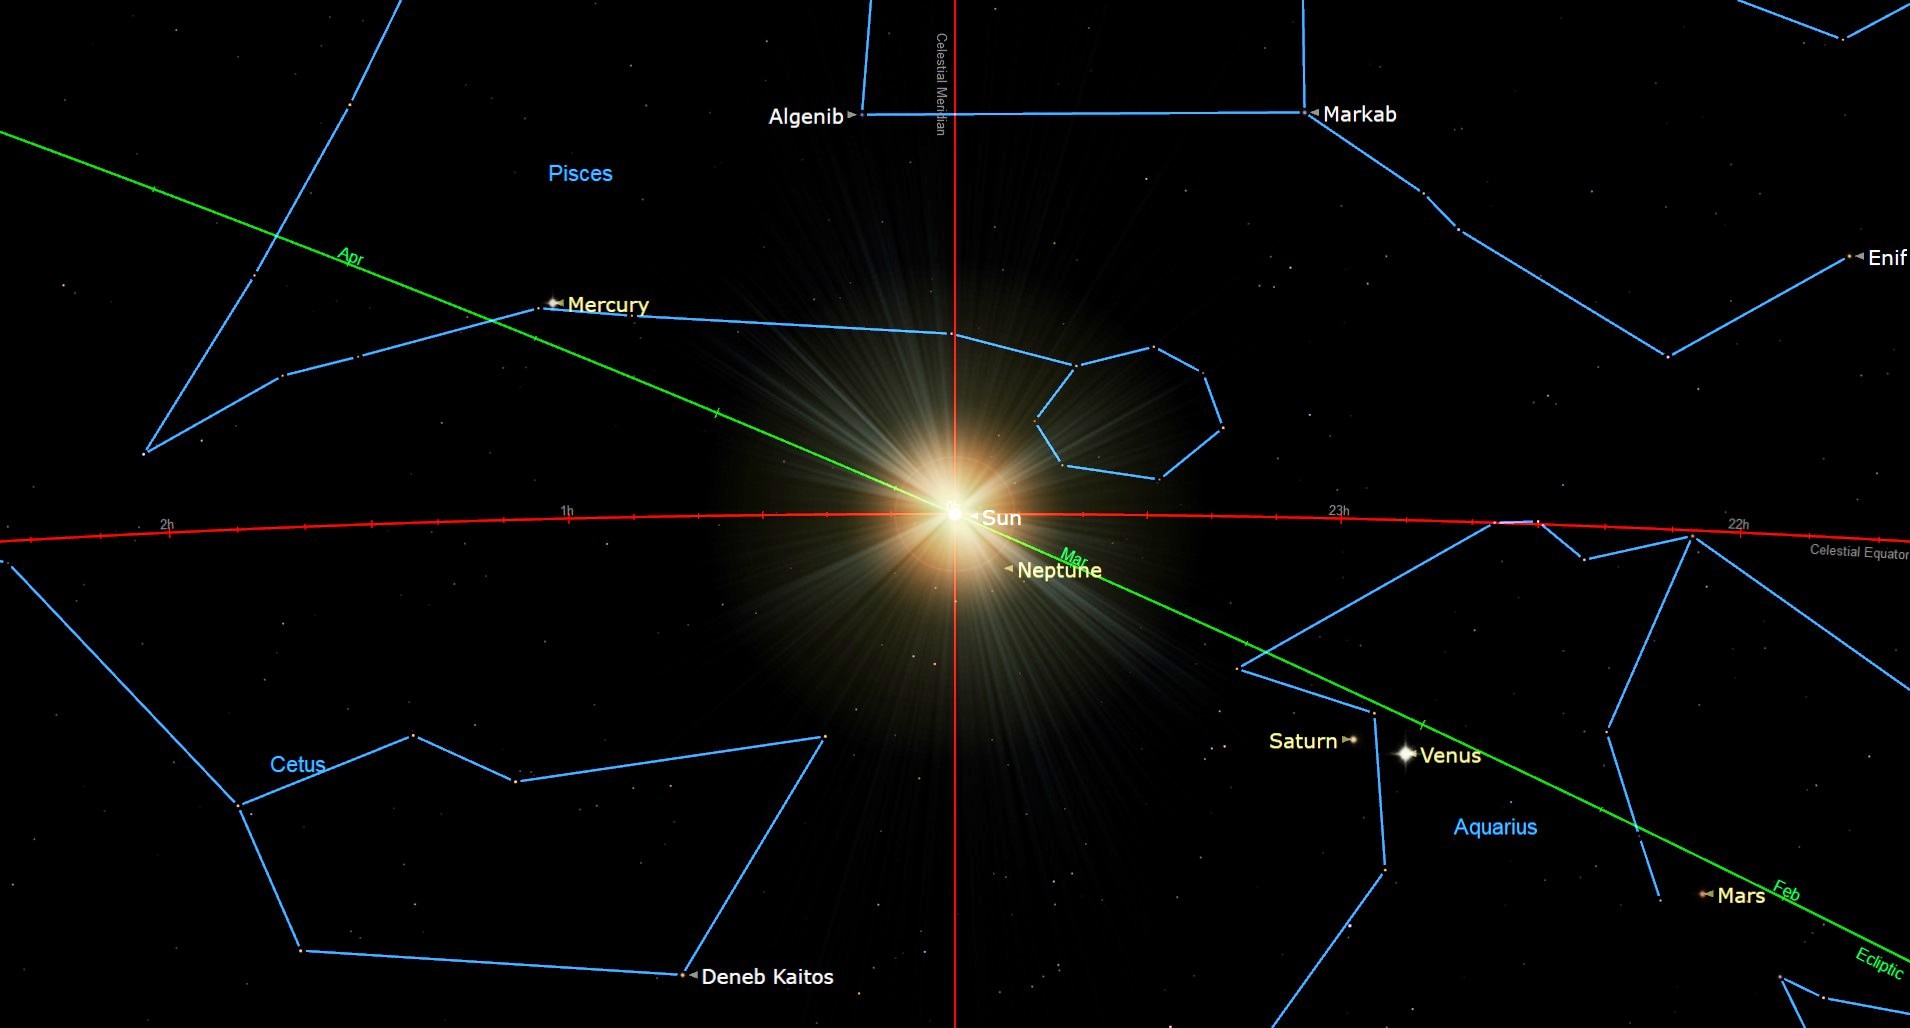 thin lines of a red cross bisect vertically and horizontally. a green line falls diagonally from the left, through the center, where a small bright sun is labeled. blue lines trace labeled stars throughout to indicate constellations.